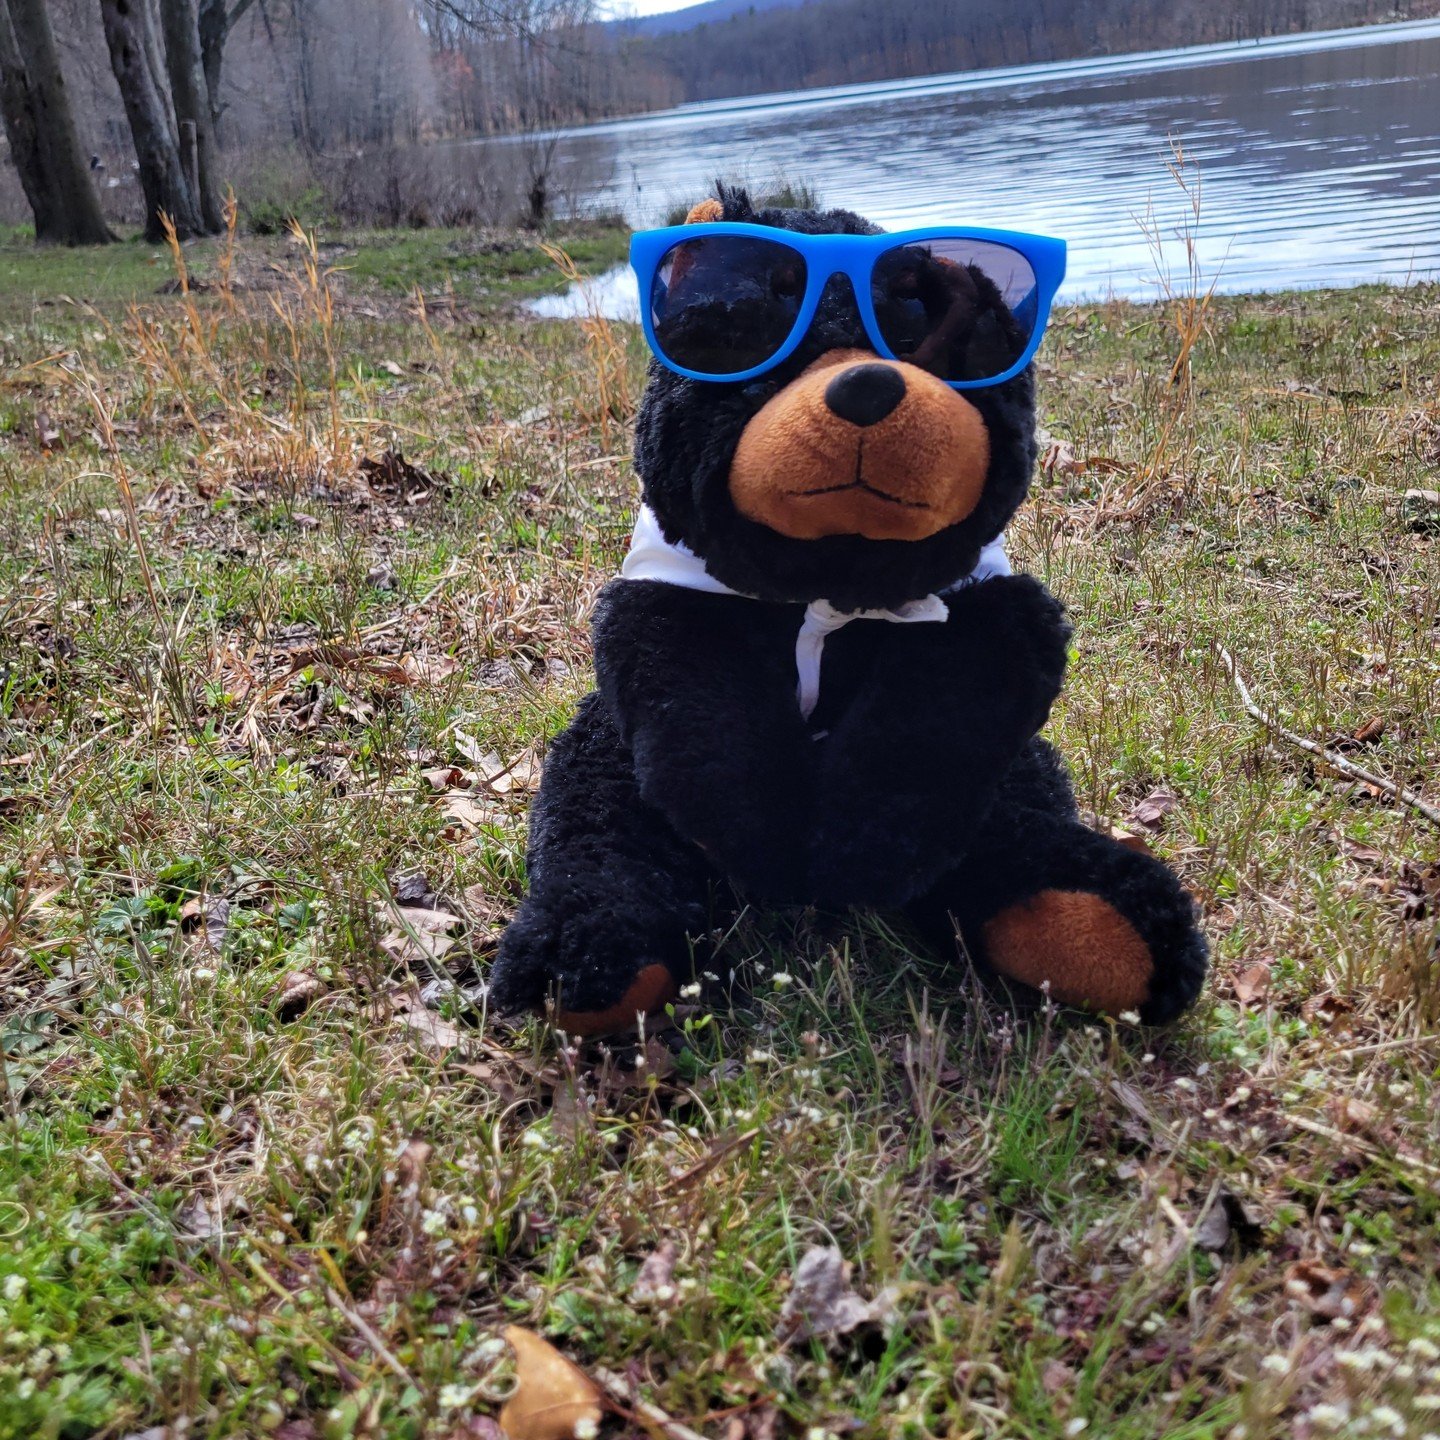 Marti recently unplugged for the day and visited Sleepy Creek Wildlife Management Area. He had a great day filled with hiking, bird watching and peeping the early spring flowers. 

#martionthemove #unplugged #wildlifemangementarea #visitmartinsburgwv